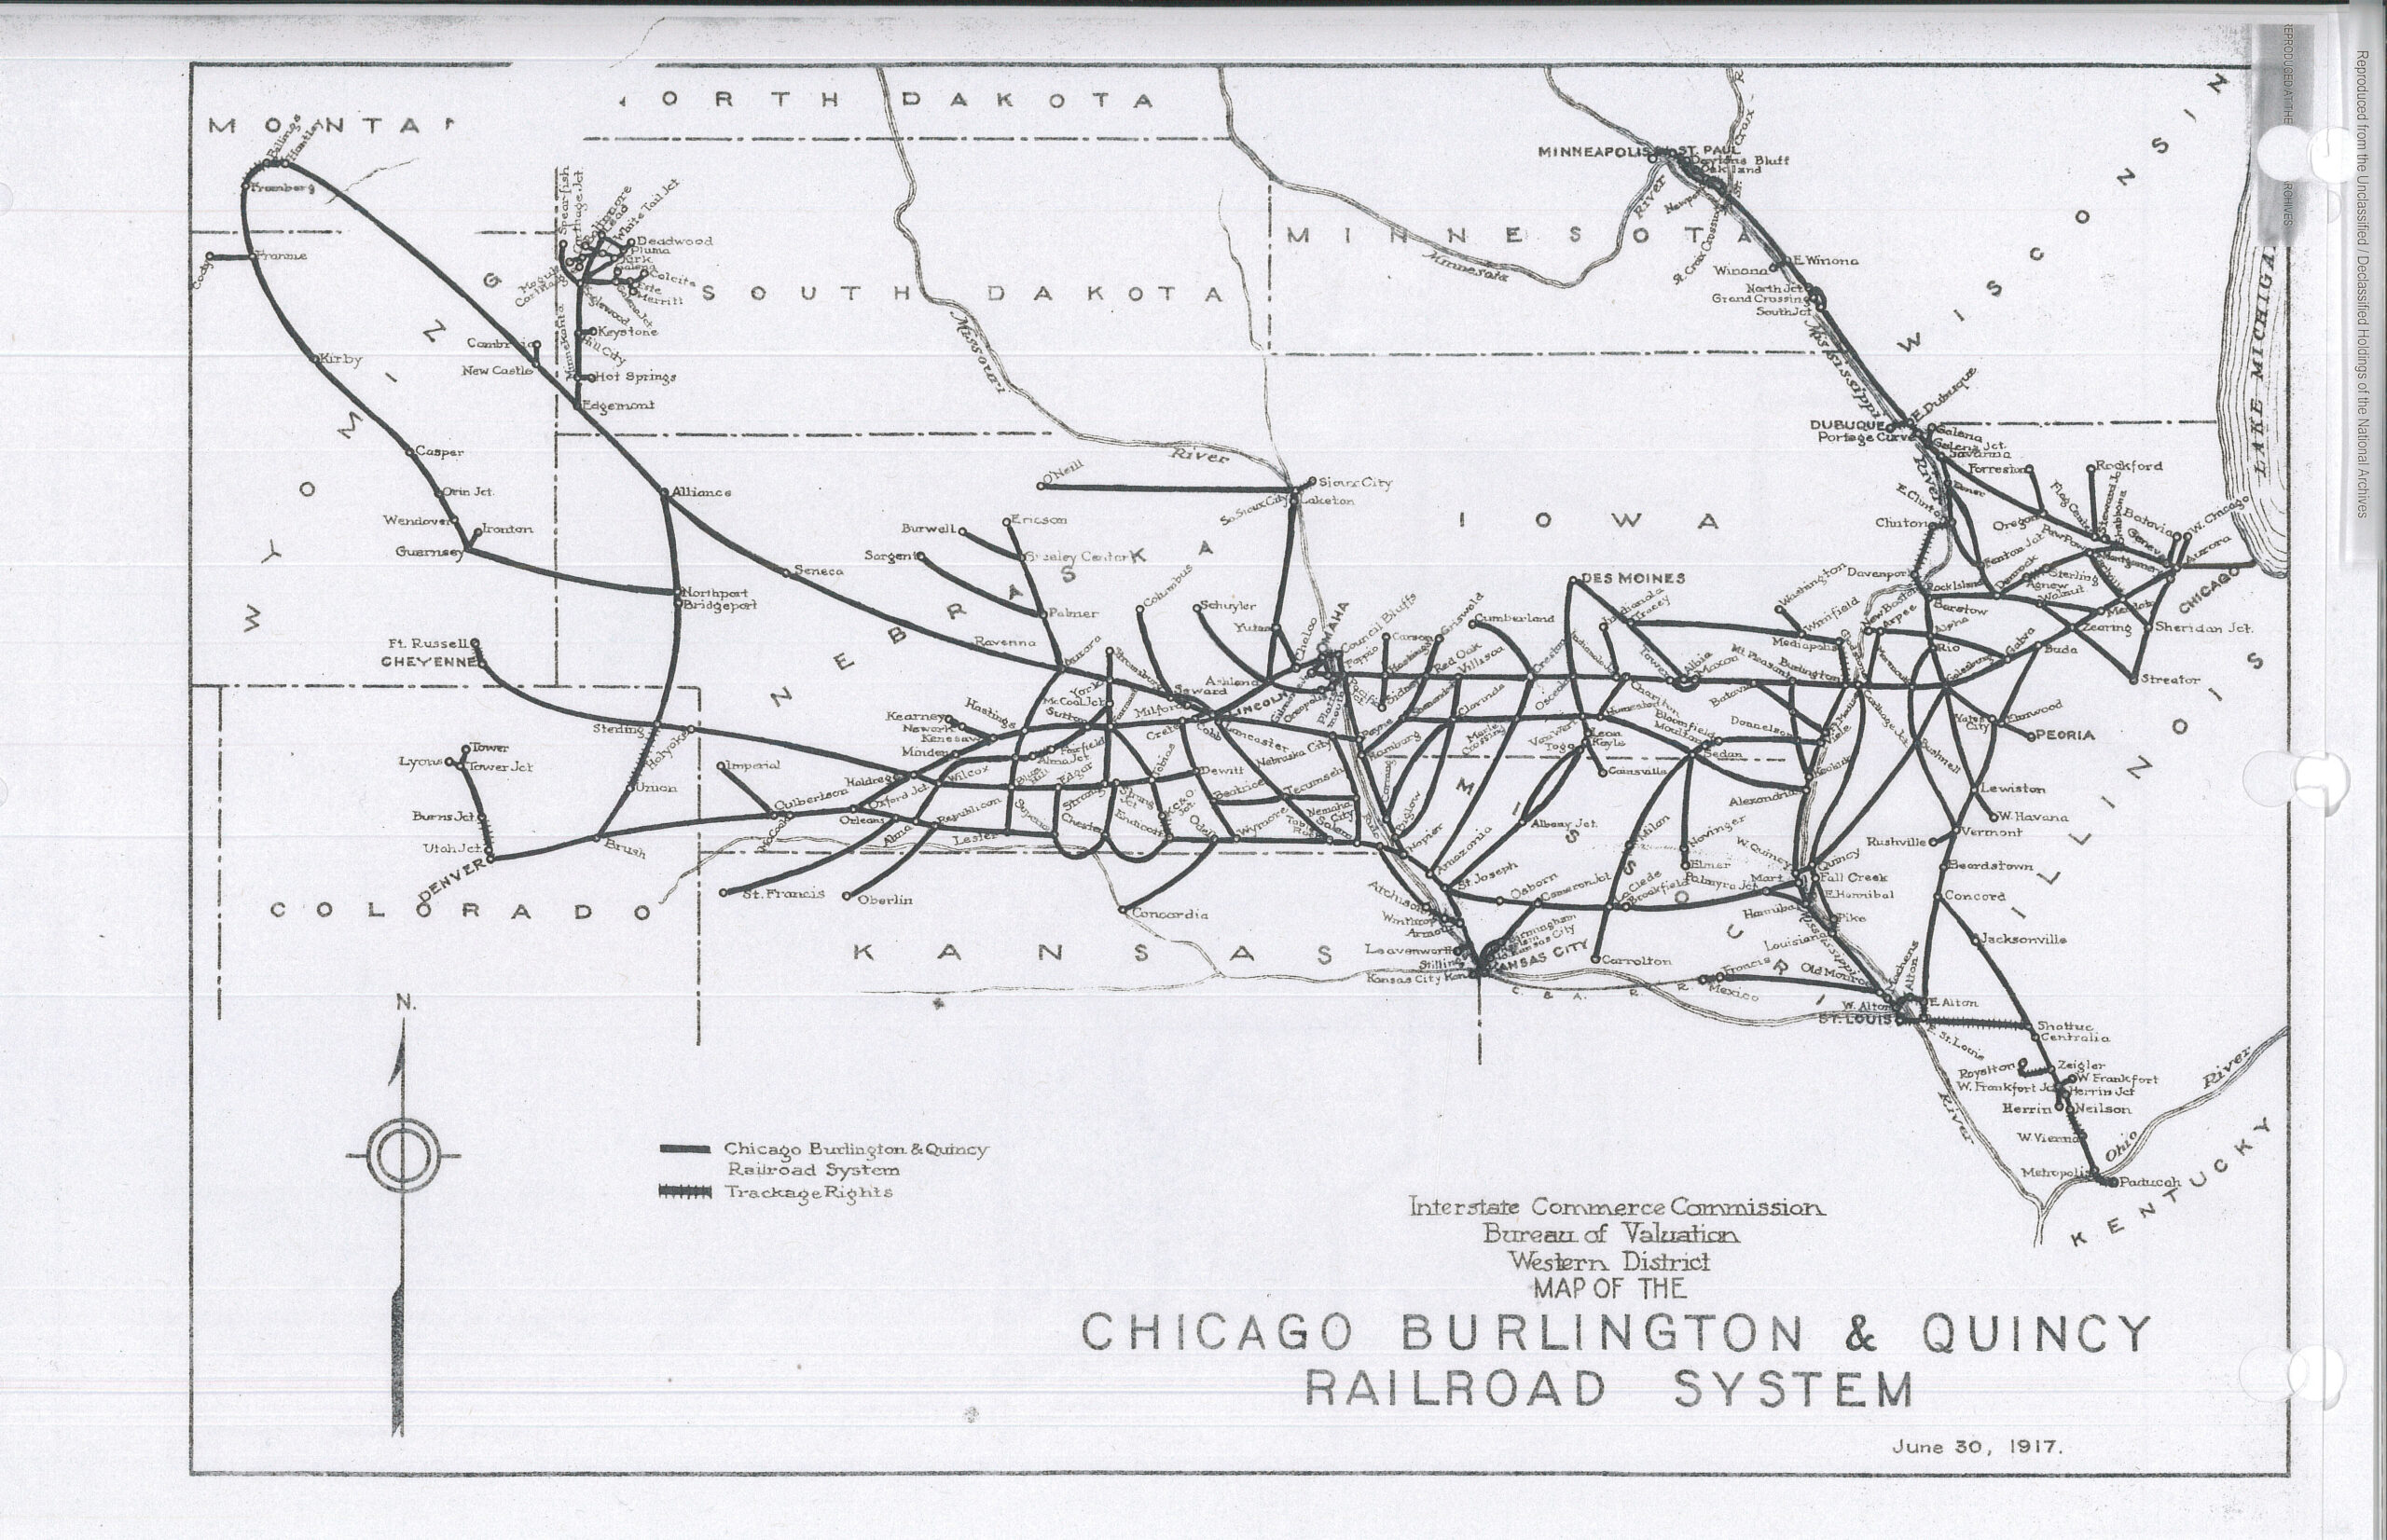 Chicago, Burlington, and Quincy railroad system map – National Archives Identifier: 160924708